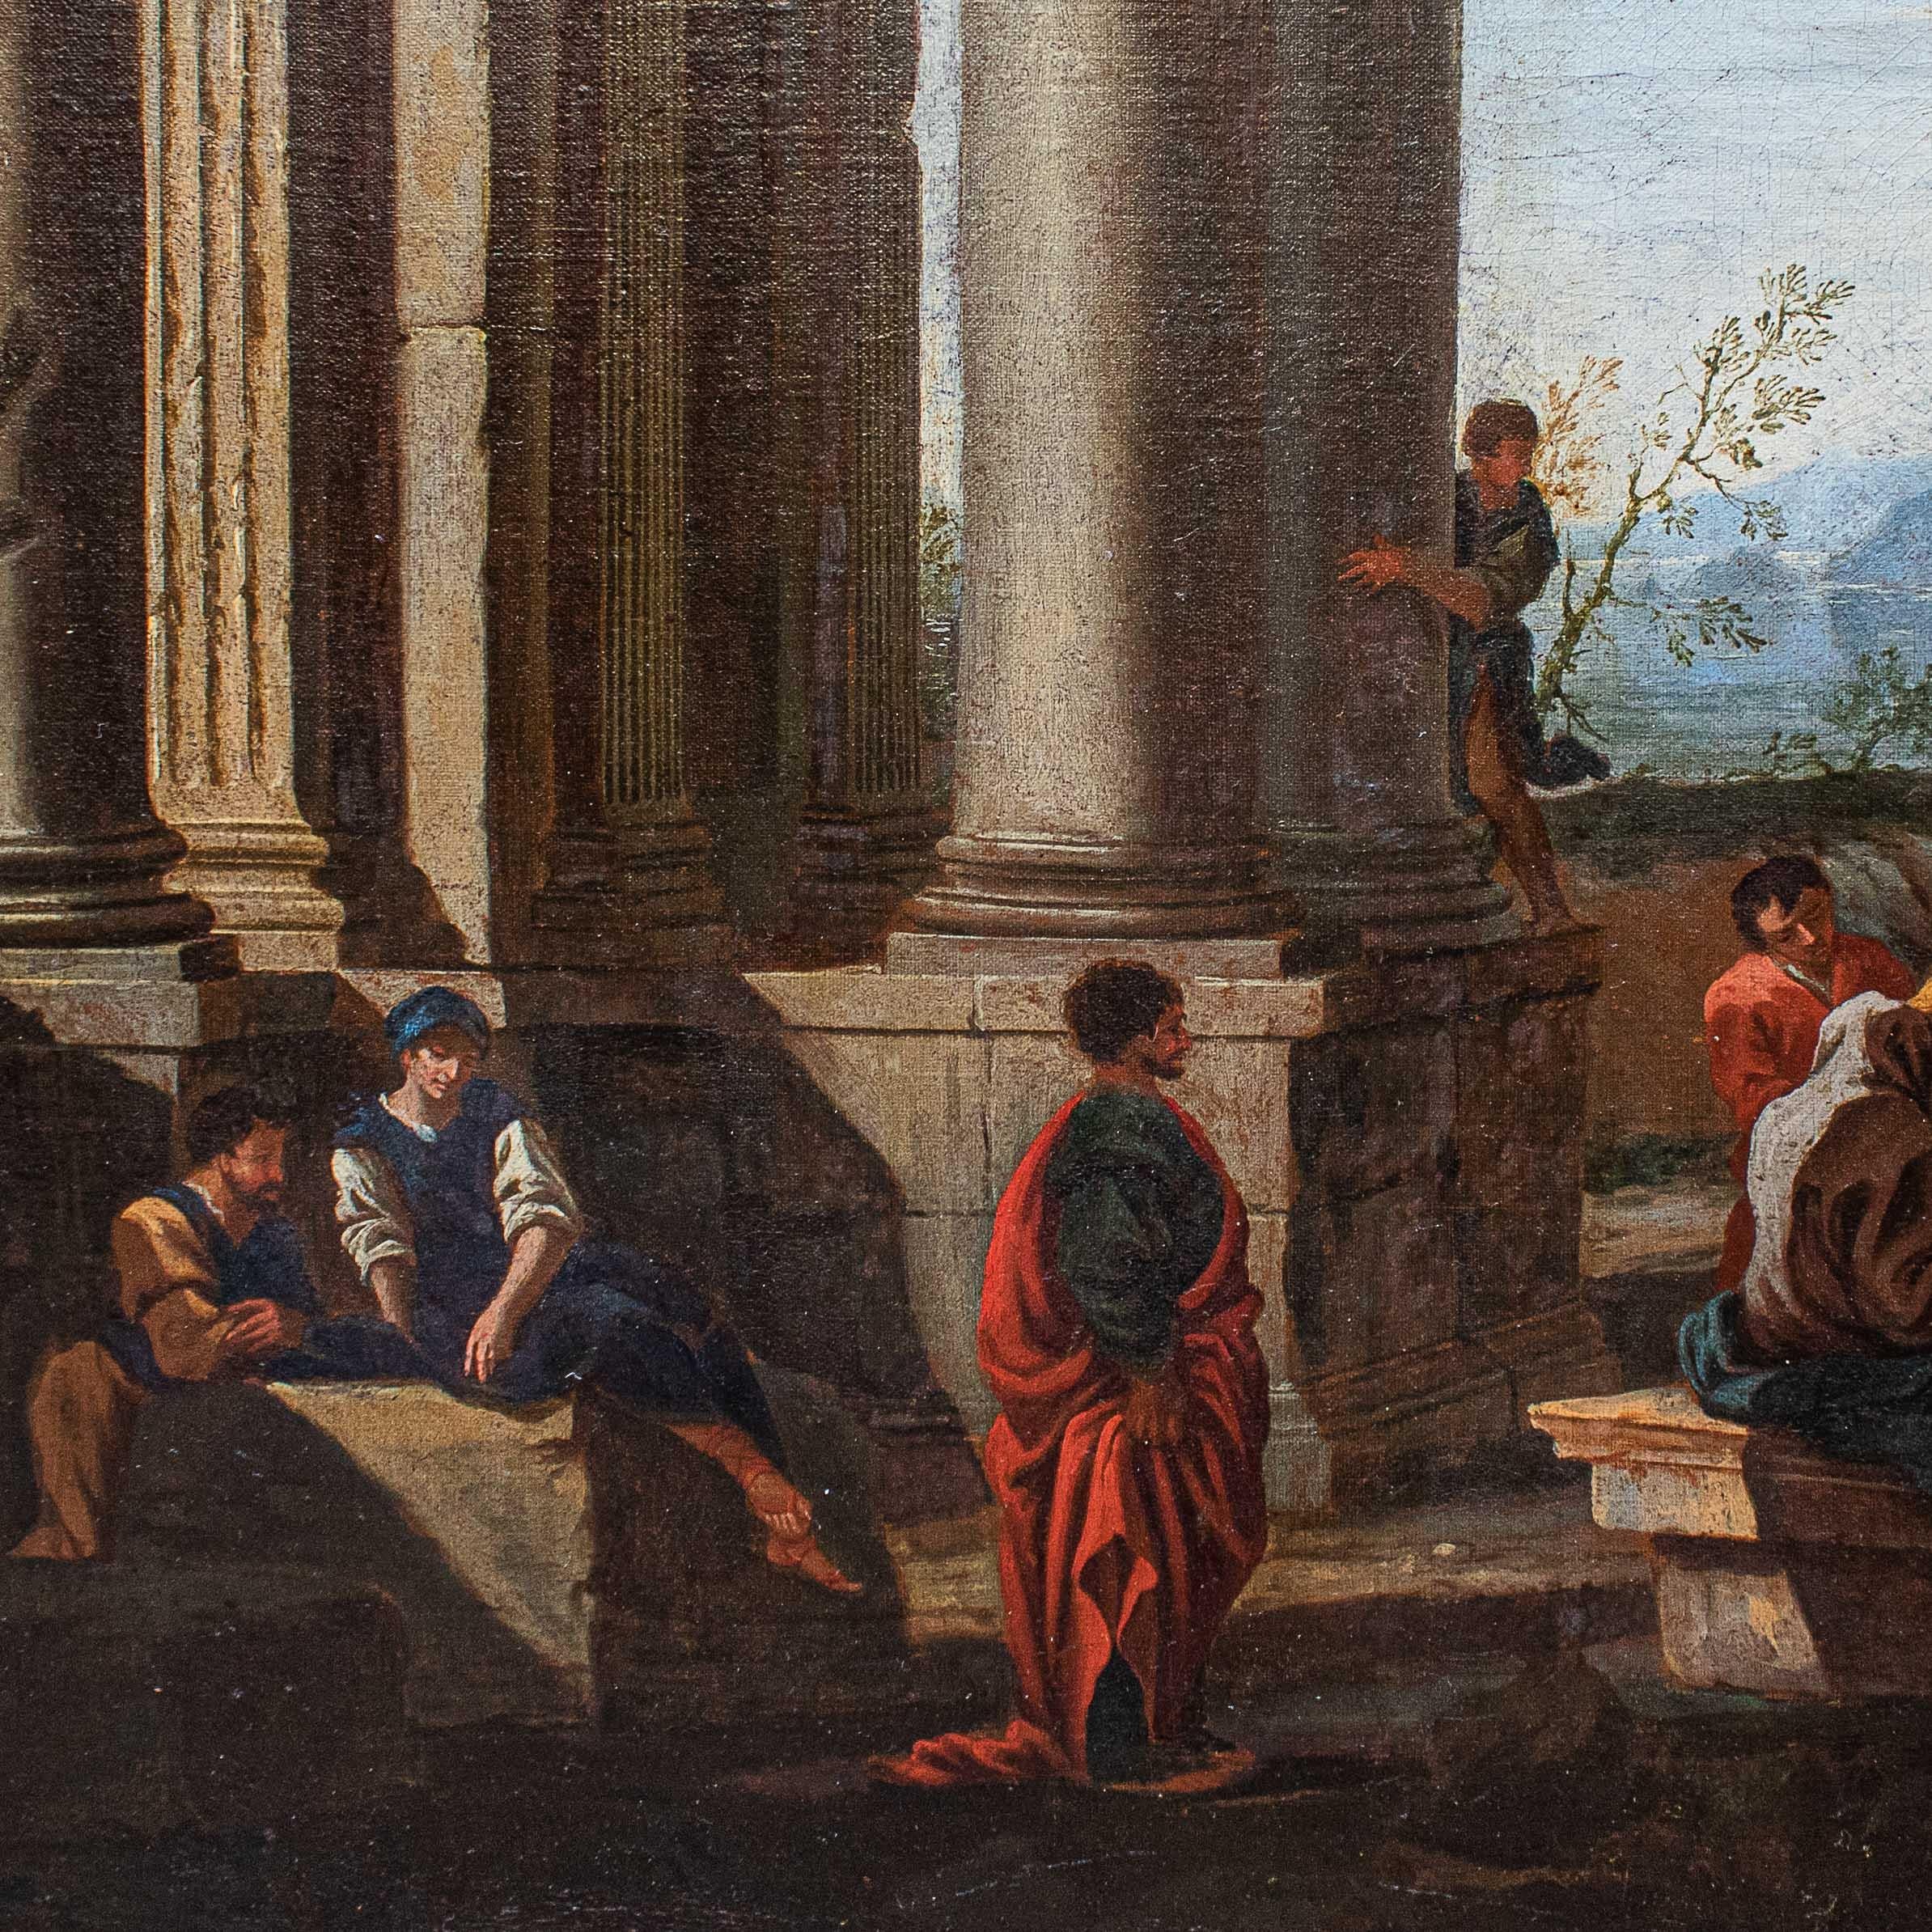 Domenico Roberti '1642-1707' Whims with Classical Ruins Paintings Oil on Canvas  9